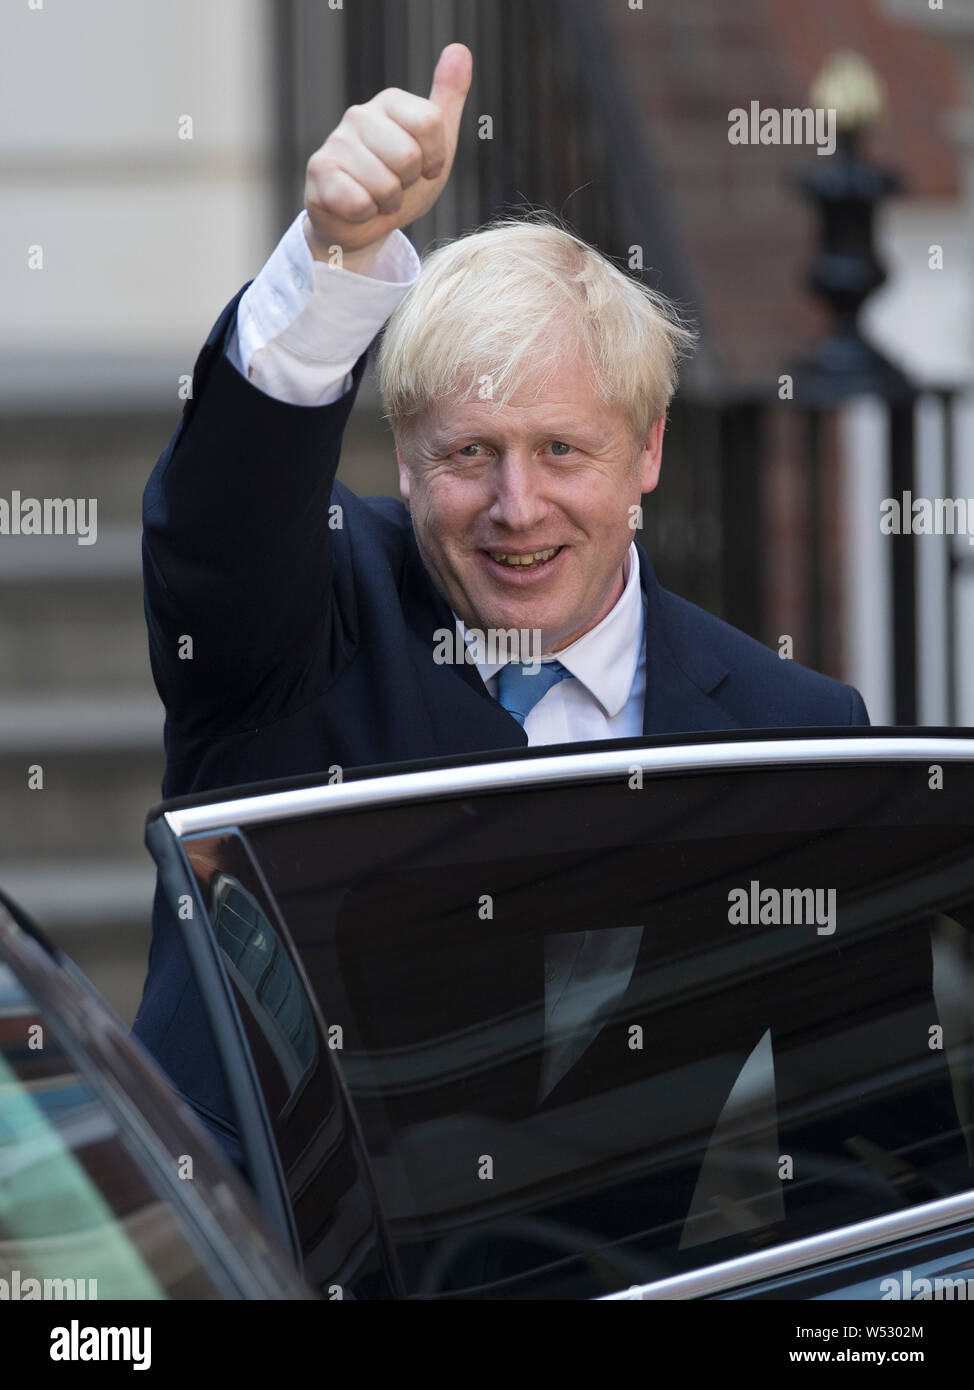 Newly elected leader of the Conservative party Boris Johnson gestures at Conservative party HQ in Westminster on July 23, 2019 in London, England. After a month of hustings, campaigning and televised debates the members of the UK's Conservative and Unionist Party have voted for Boris Johnson to be their new leader and the country's next Prime Minister, replacing Theresa May Stock Photo